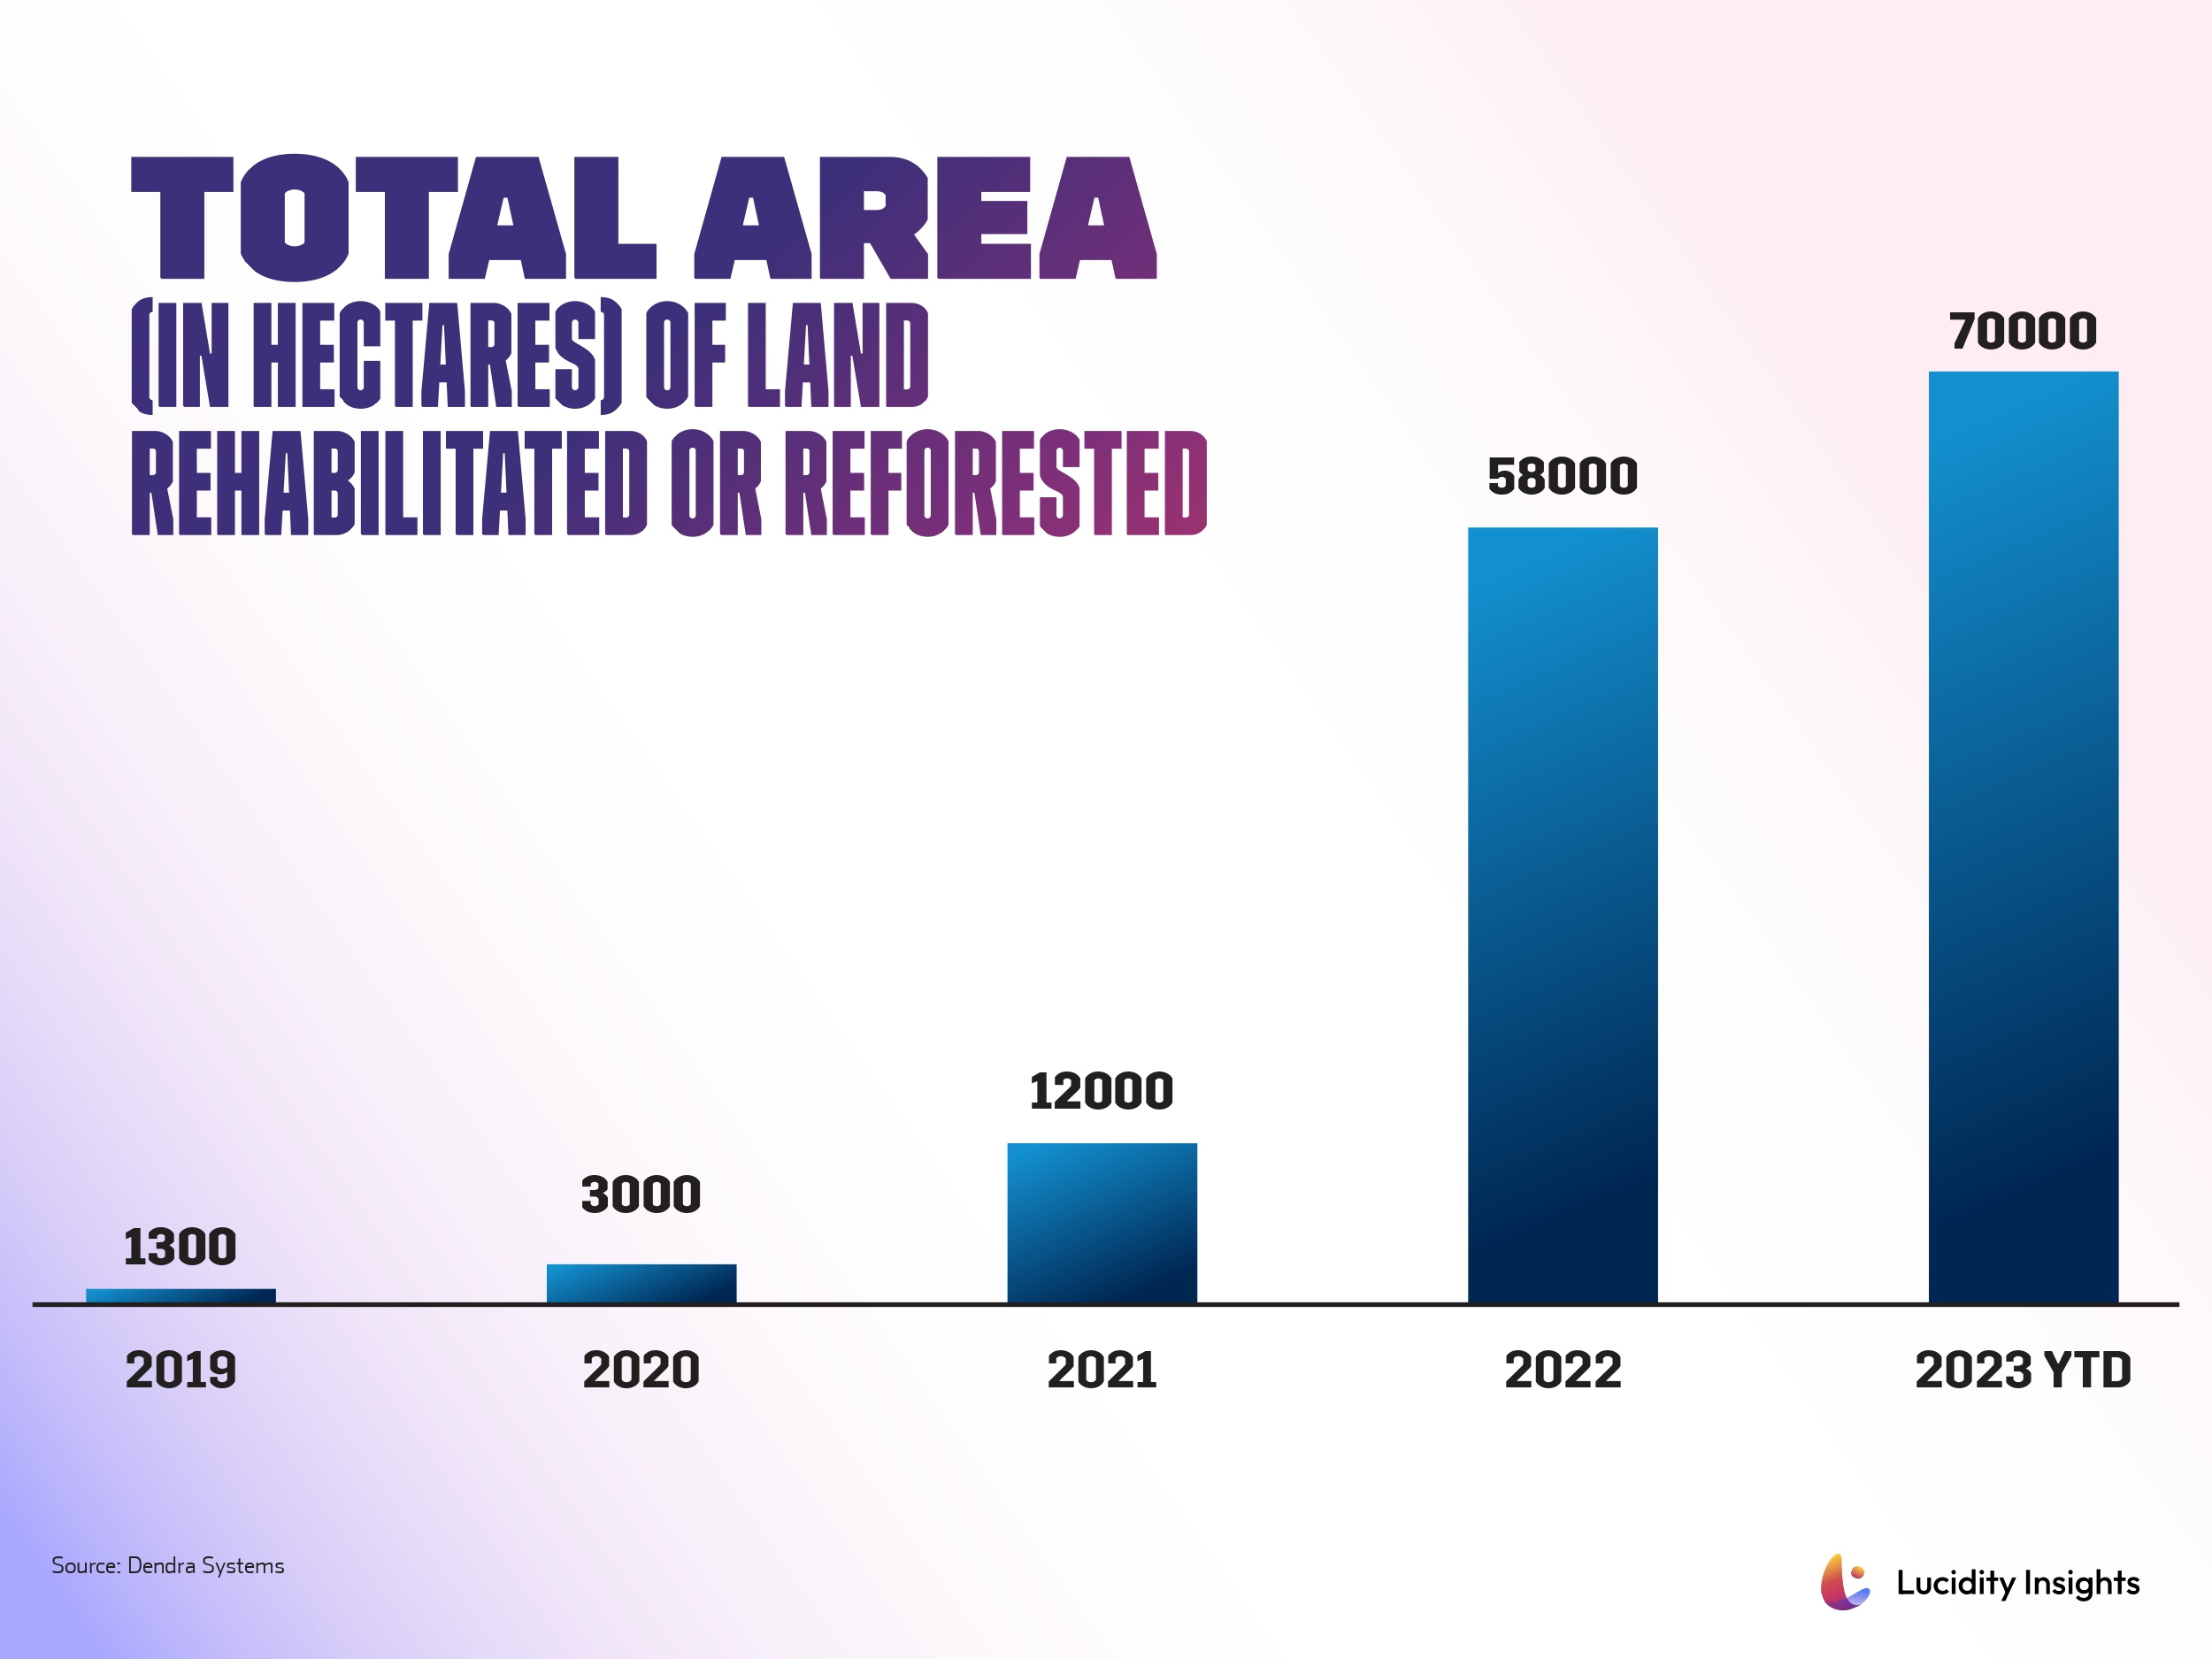 Total Area of Land Rehabilitated or Reforested in Hectares